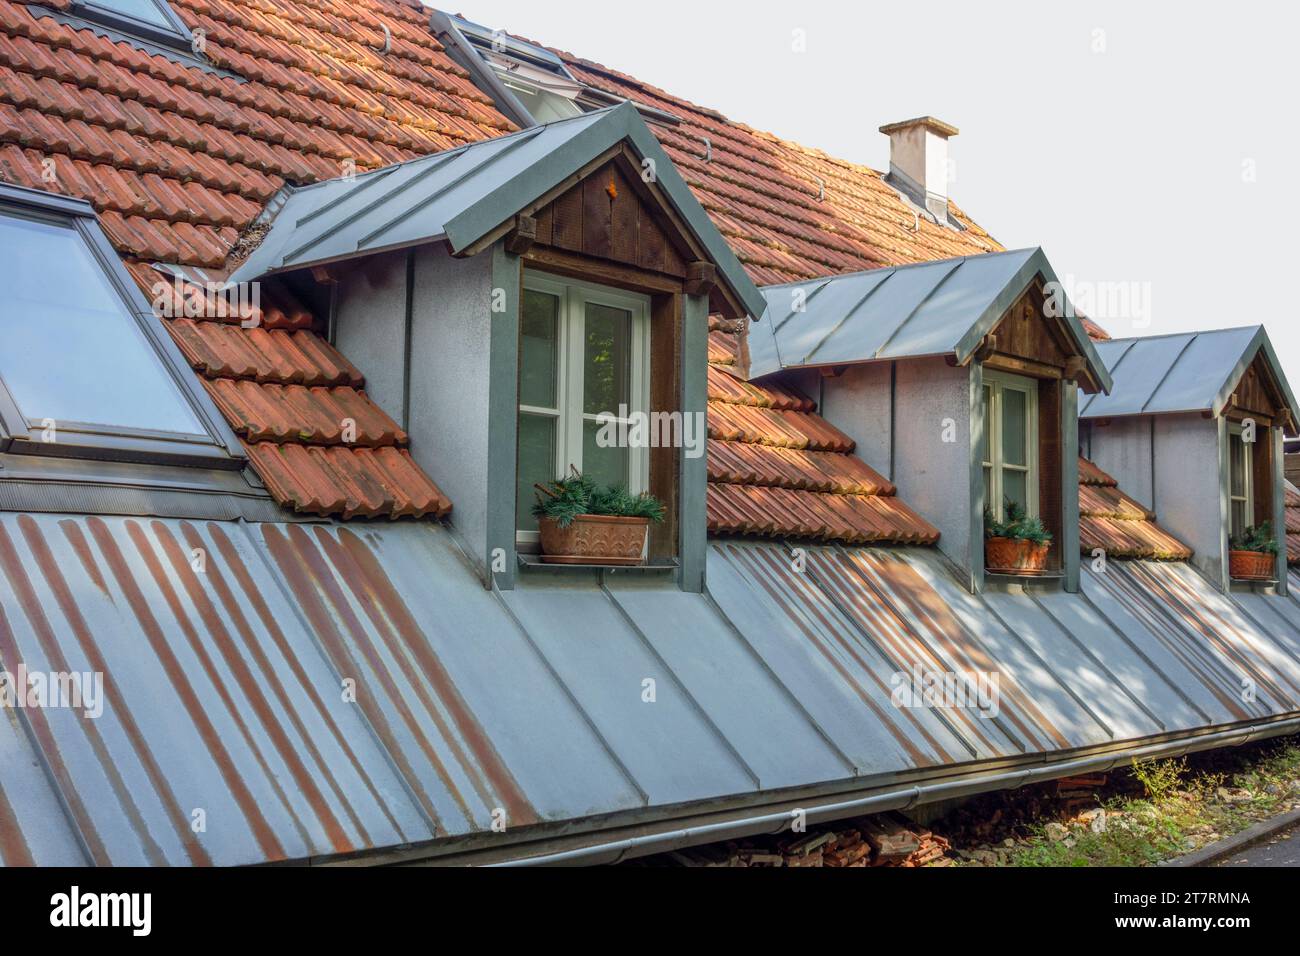 Outdoor shot of a roof including some dormers Stock Photo